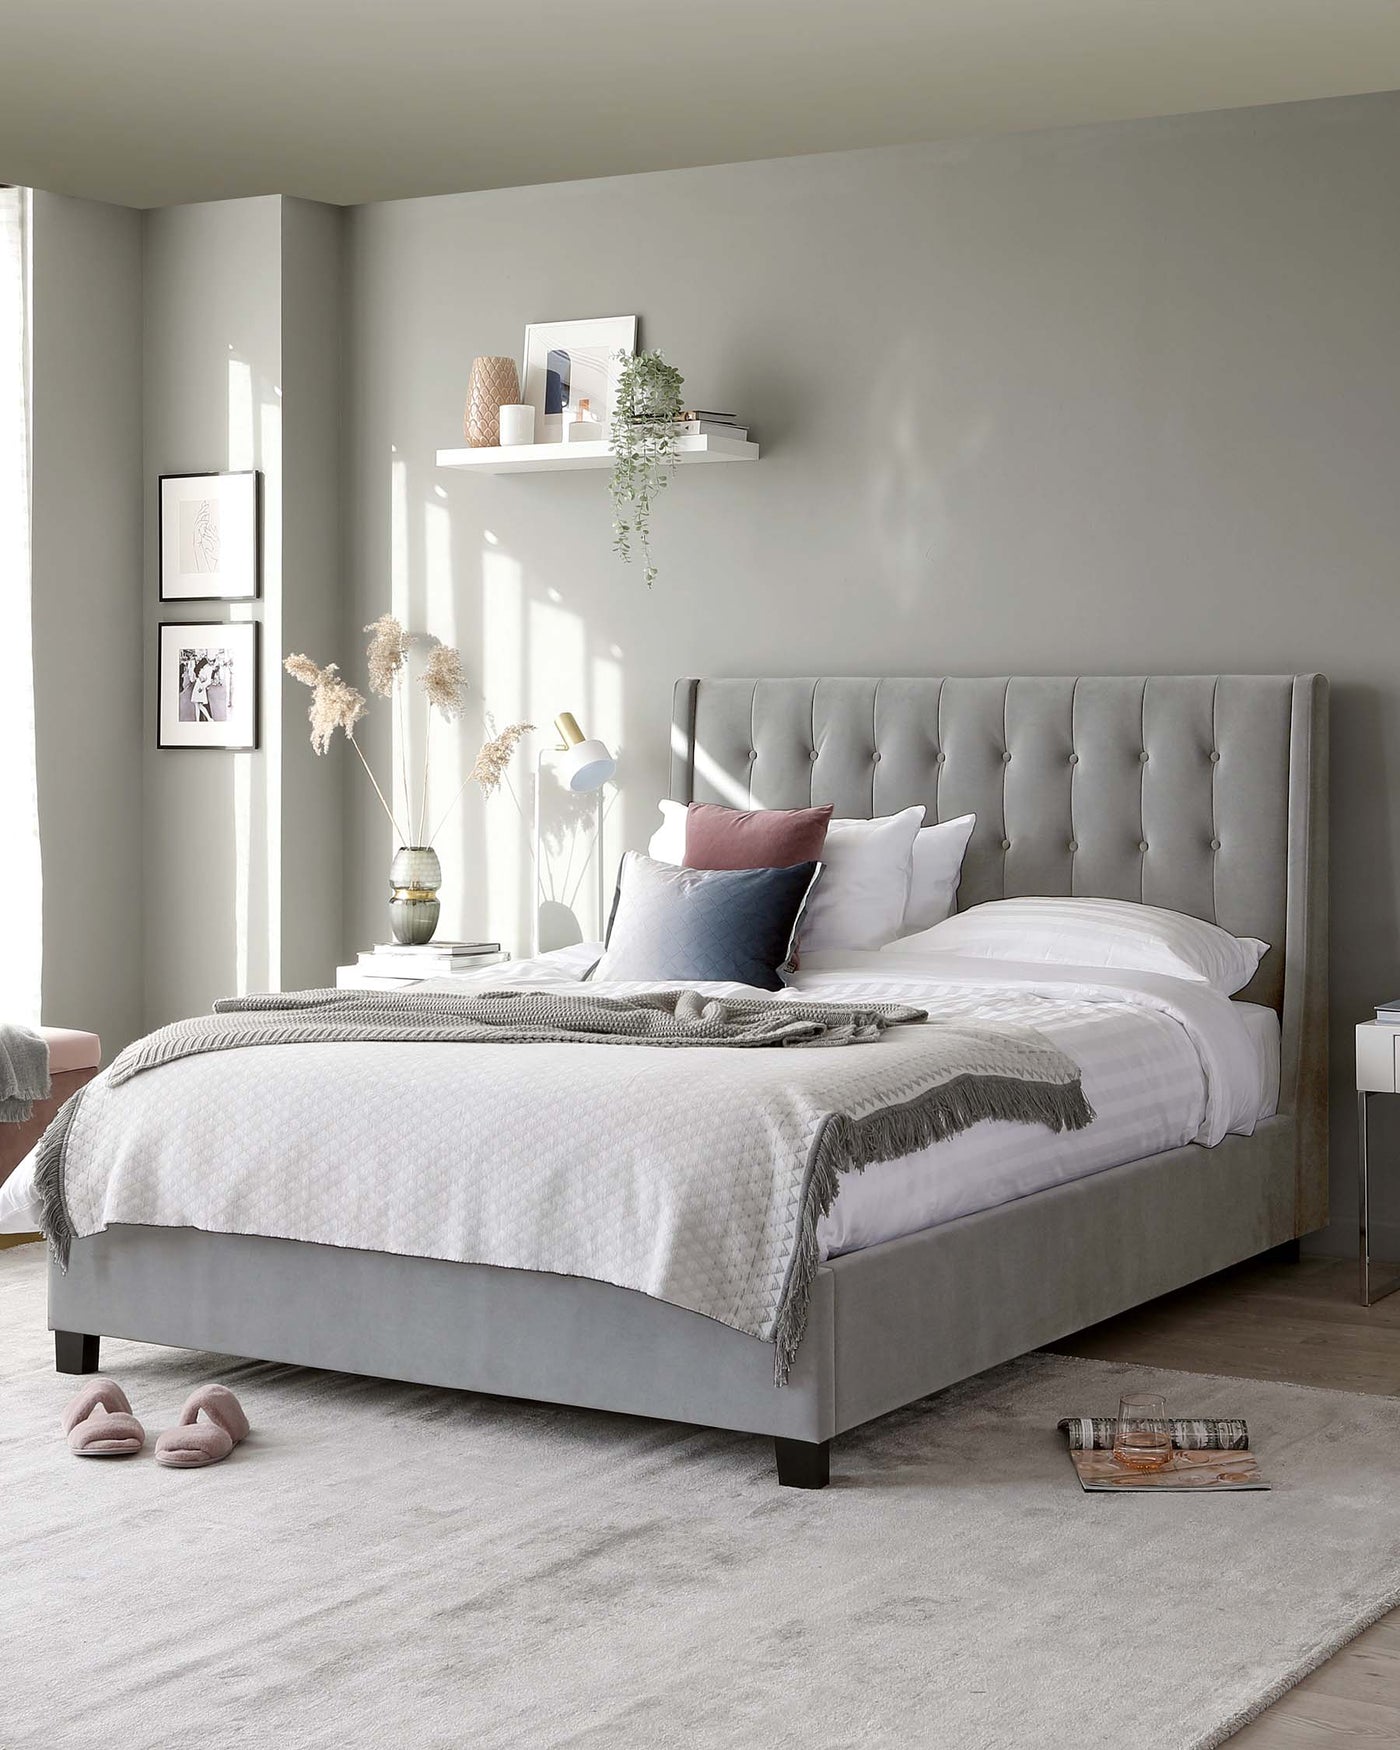 Elegant grey upholstered bed with tufted headboard and a matching bench at the foot of the bed, placed on a grey area rug.